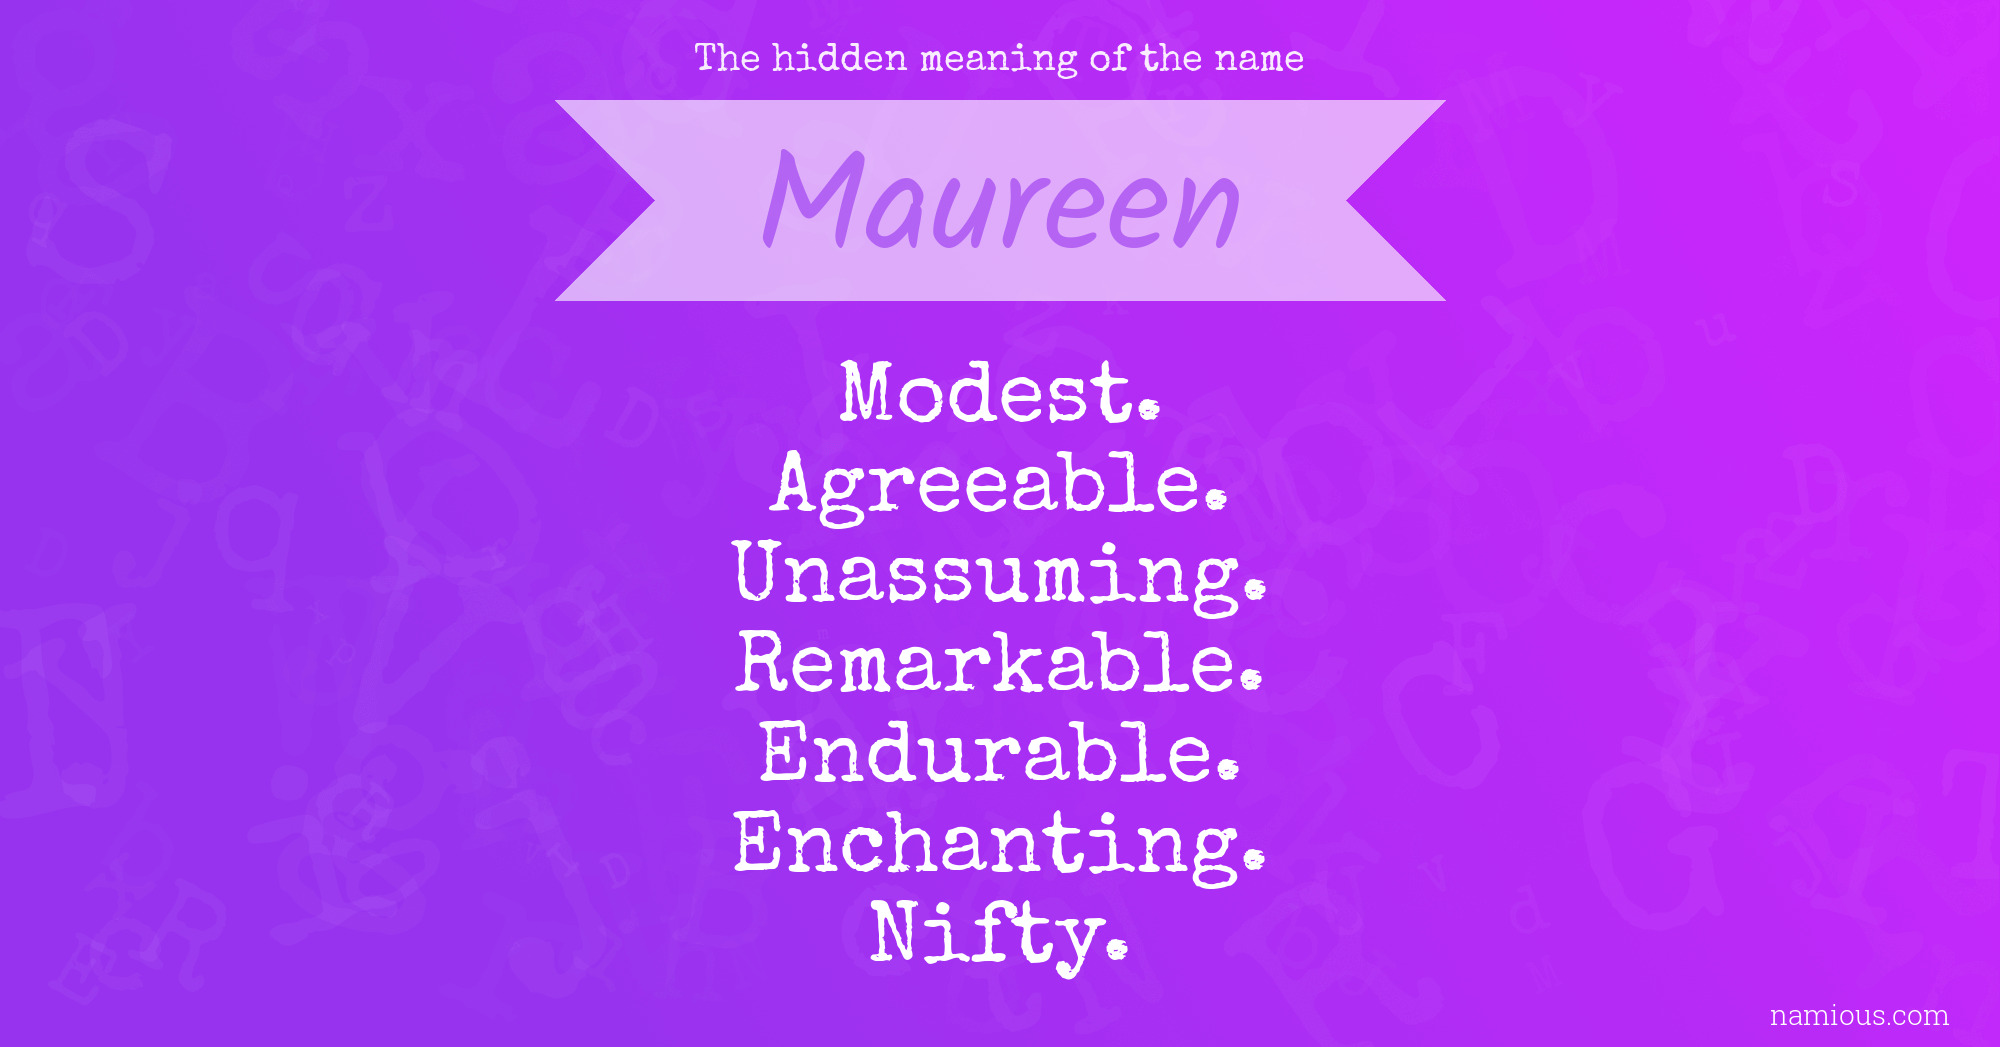 The hidden meaning of the name Maureen